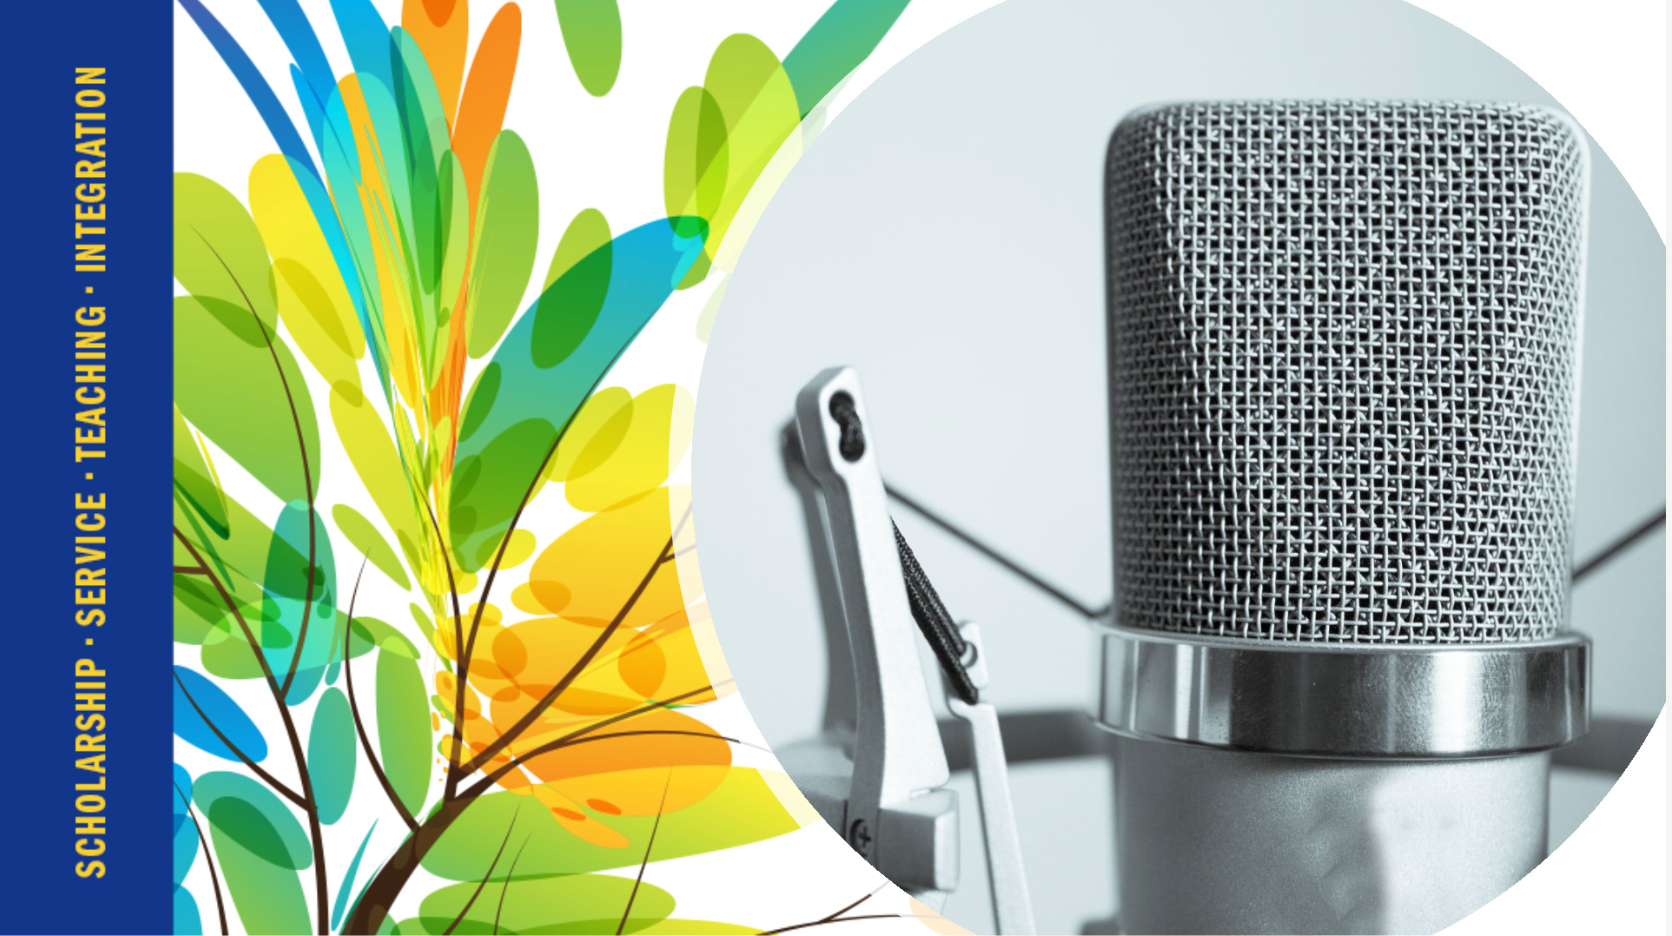 Podcast image of microphone and text scholarship, teaching, service and integration